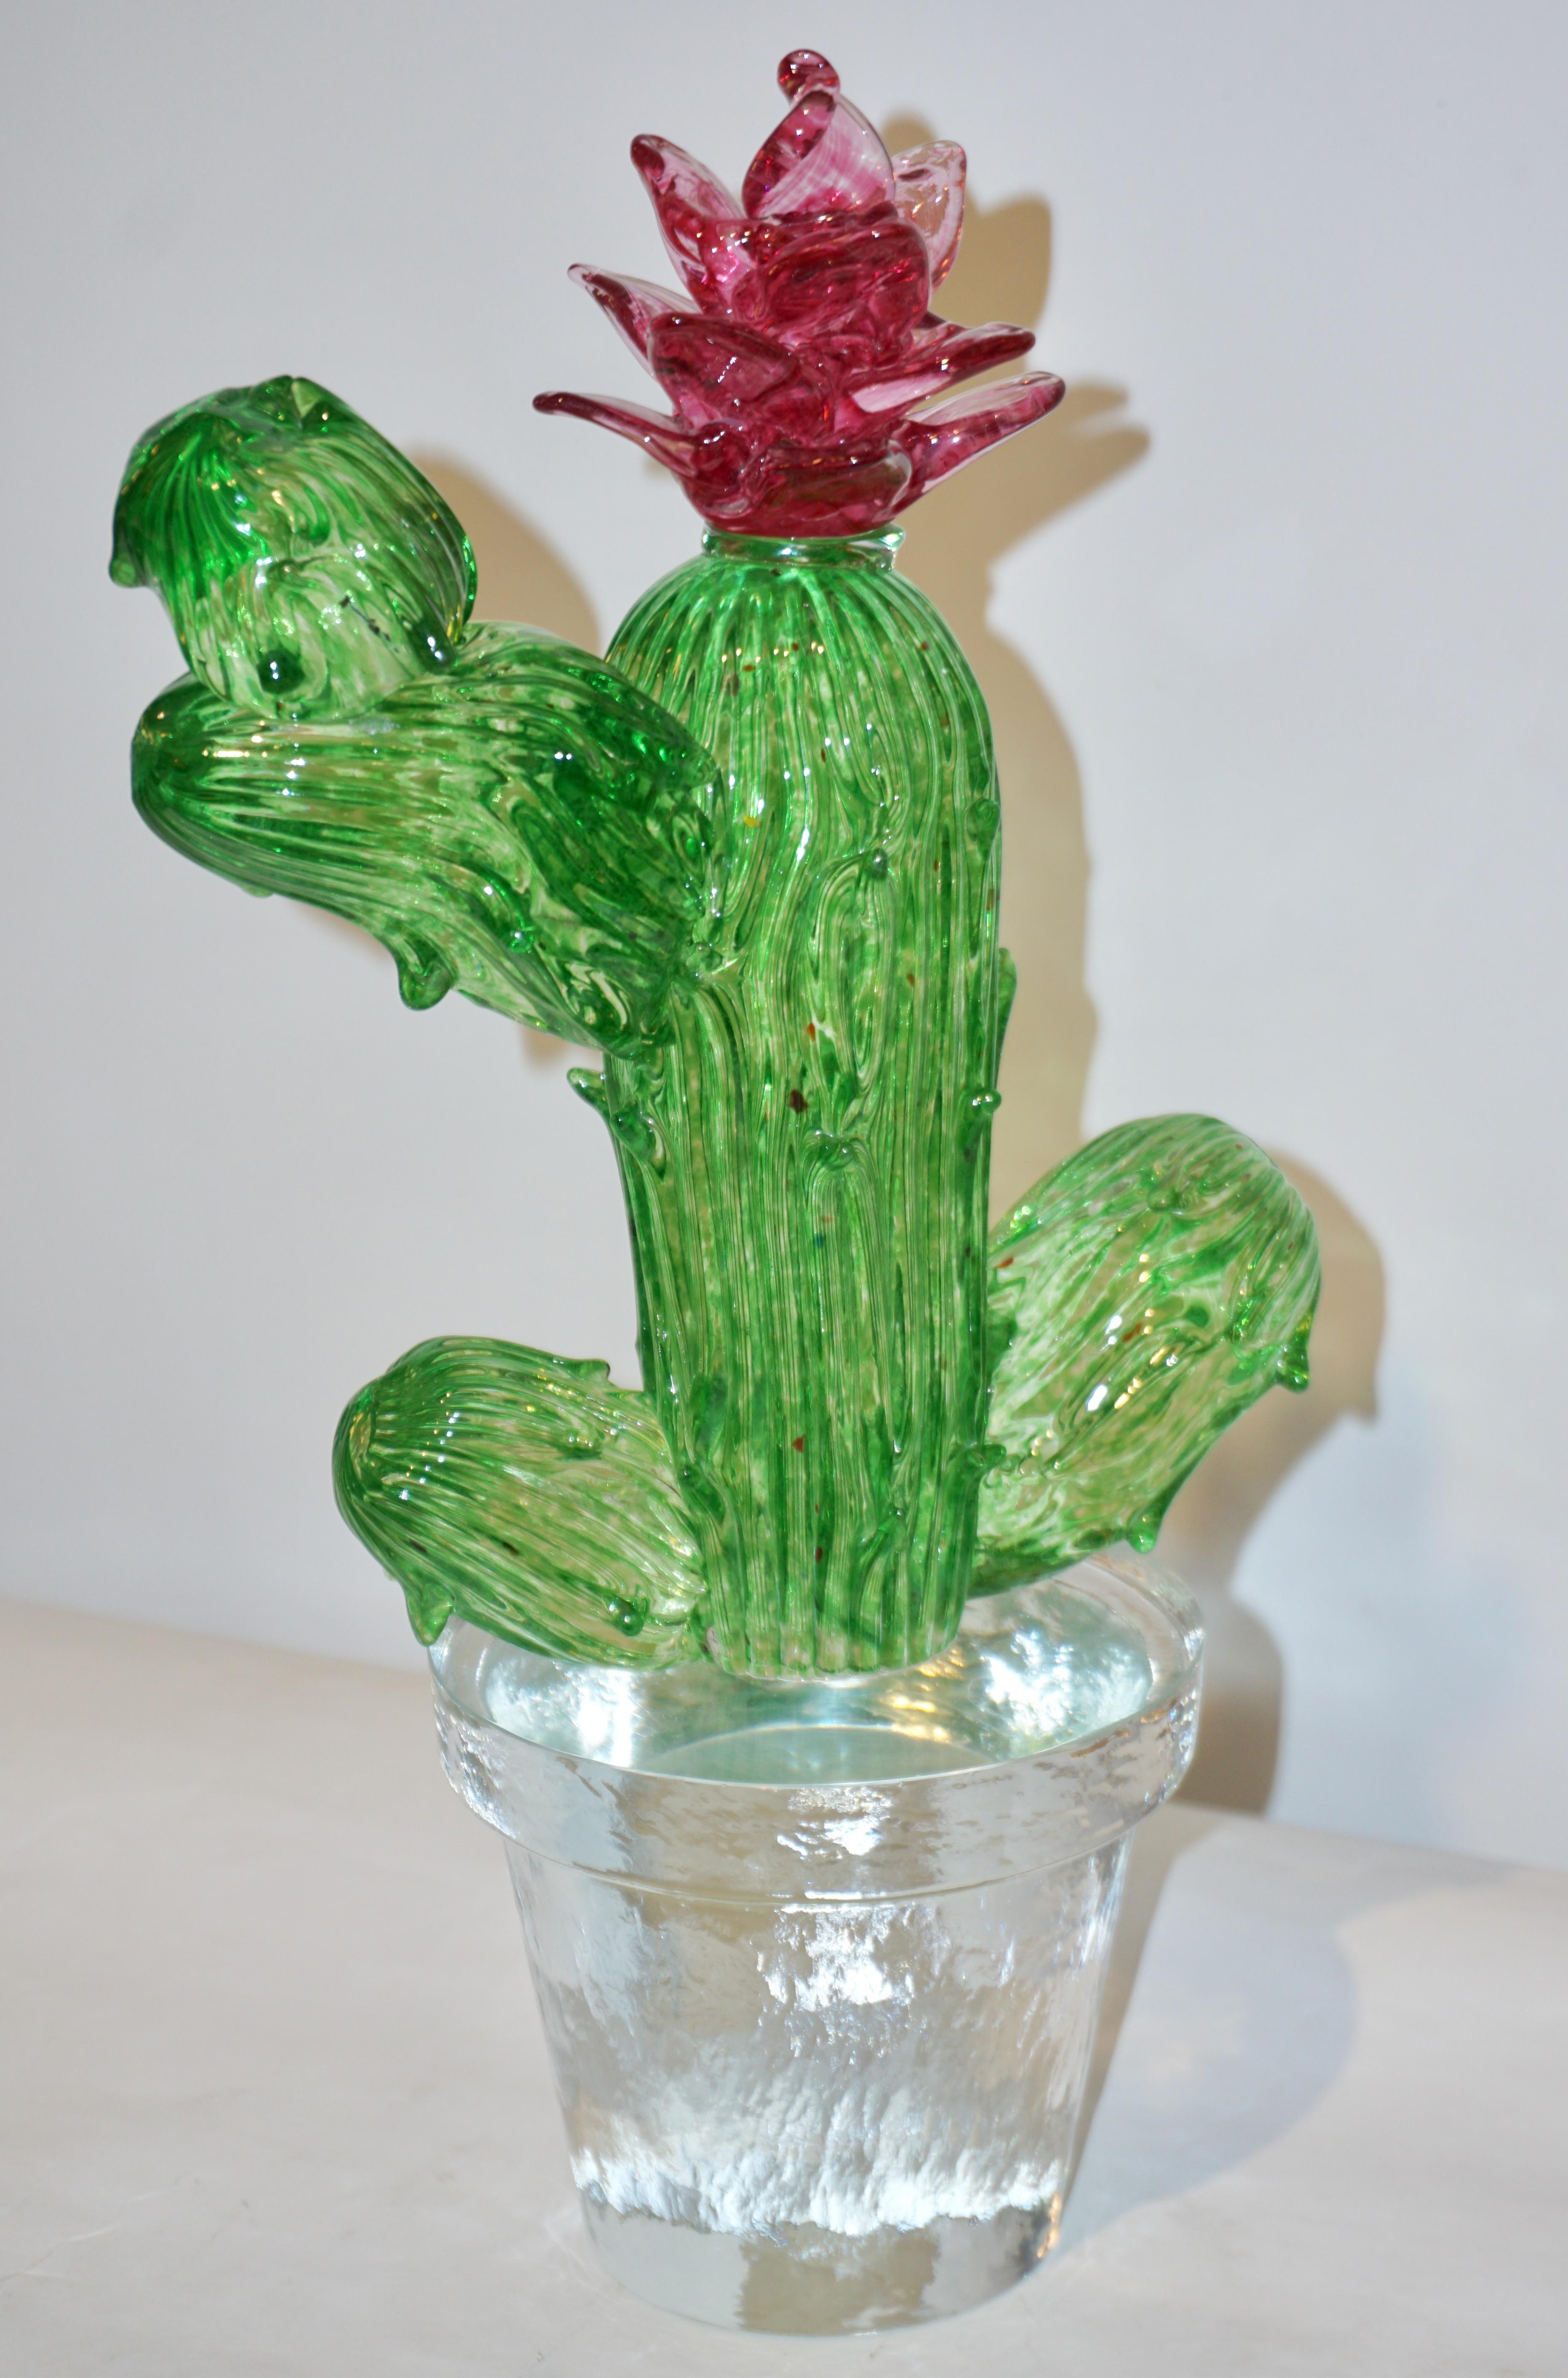 Art Glass Formia Marta Marzotto Vintage Limited Edition Murano Glass Green Cactus Plant